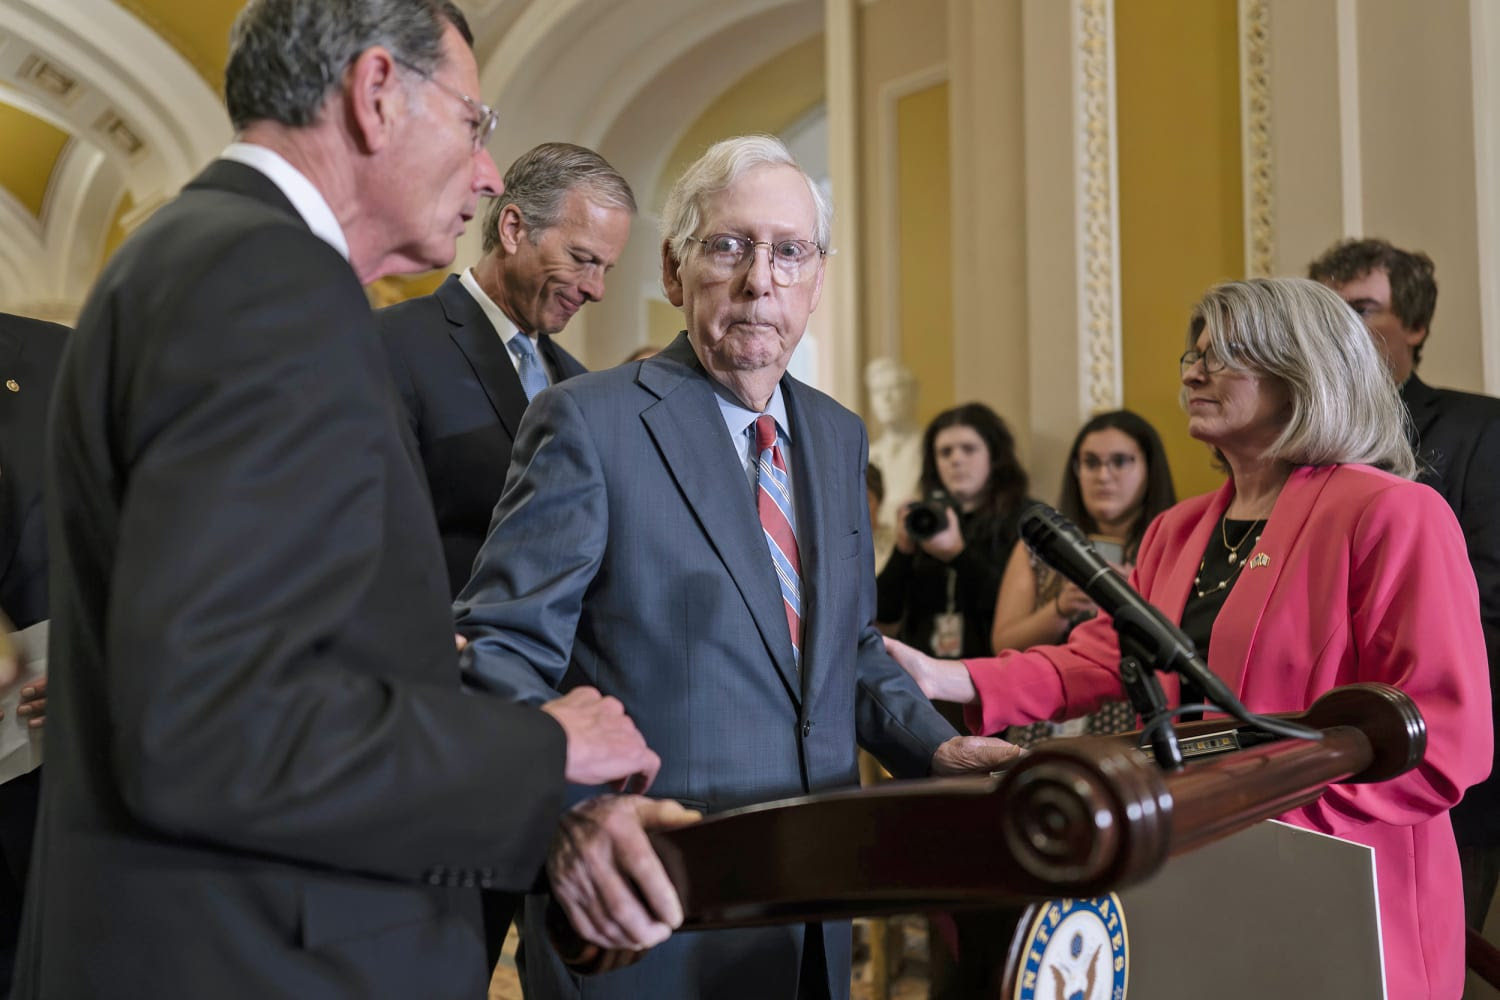 Sen. Mitch McConnell was escorted away from cameras after freezing during a news conference 230727-mitch-mcconnell-mn-1445-c5c339